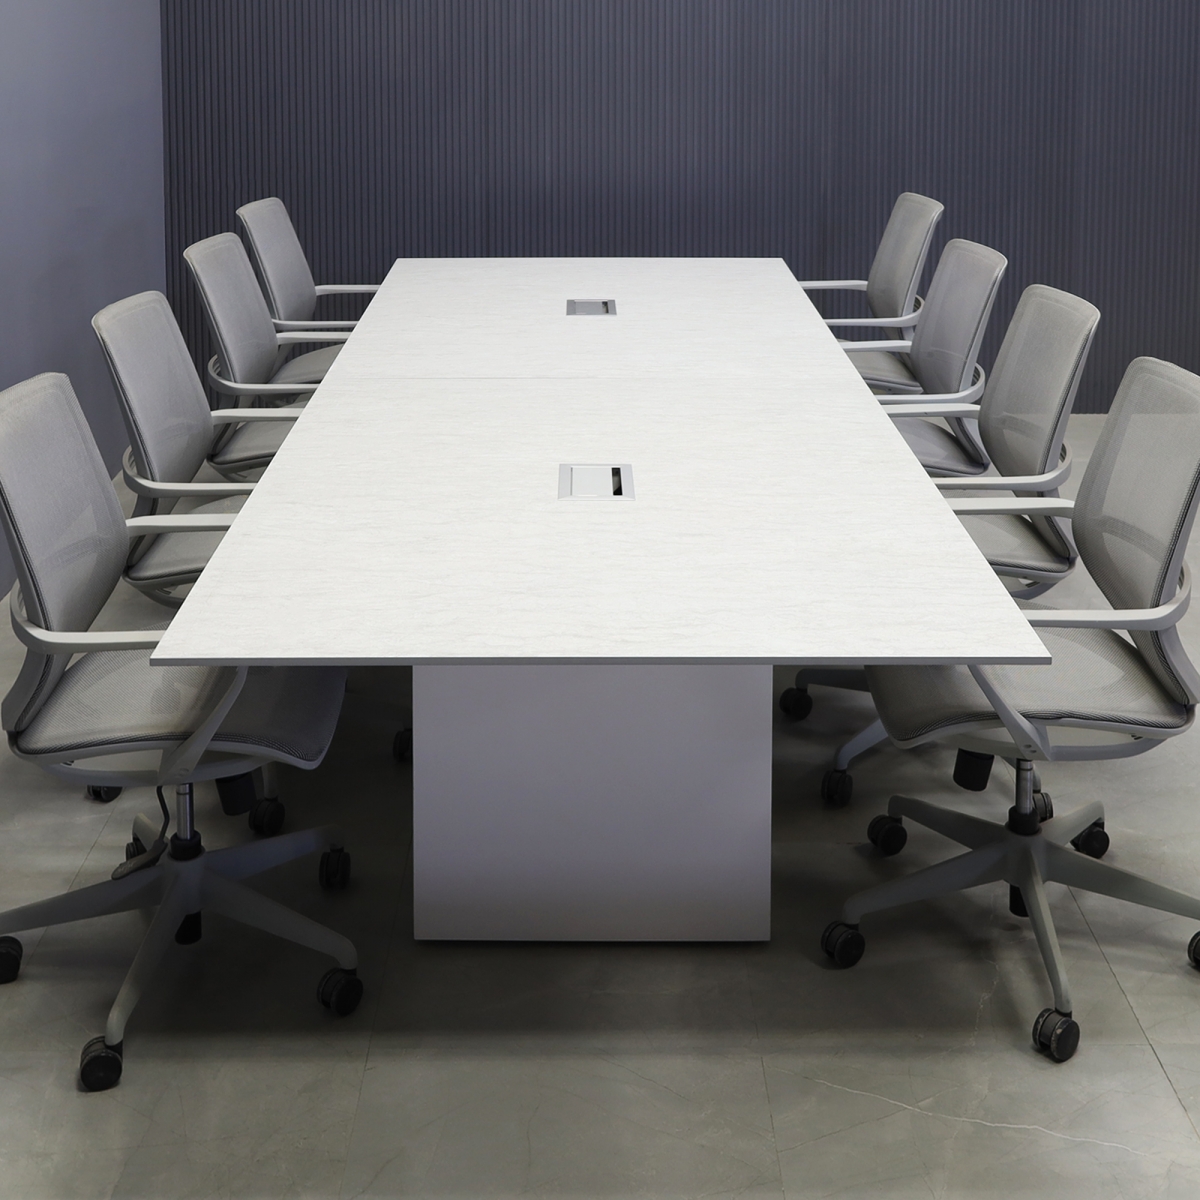 Aurora Rectangular Conference Table In Spanish Limestone Engineered Stone Top - 120 In. - Stock #34